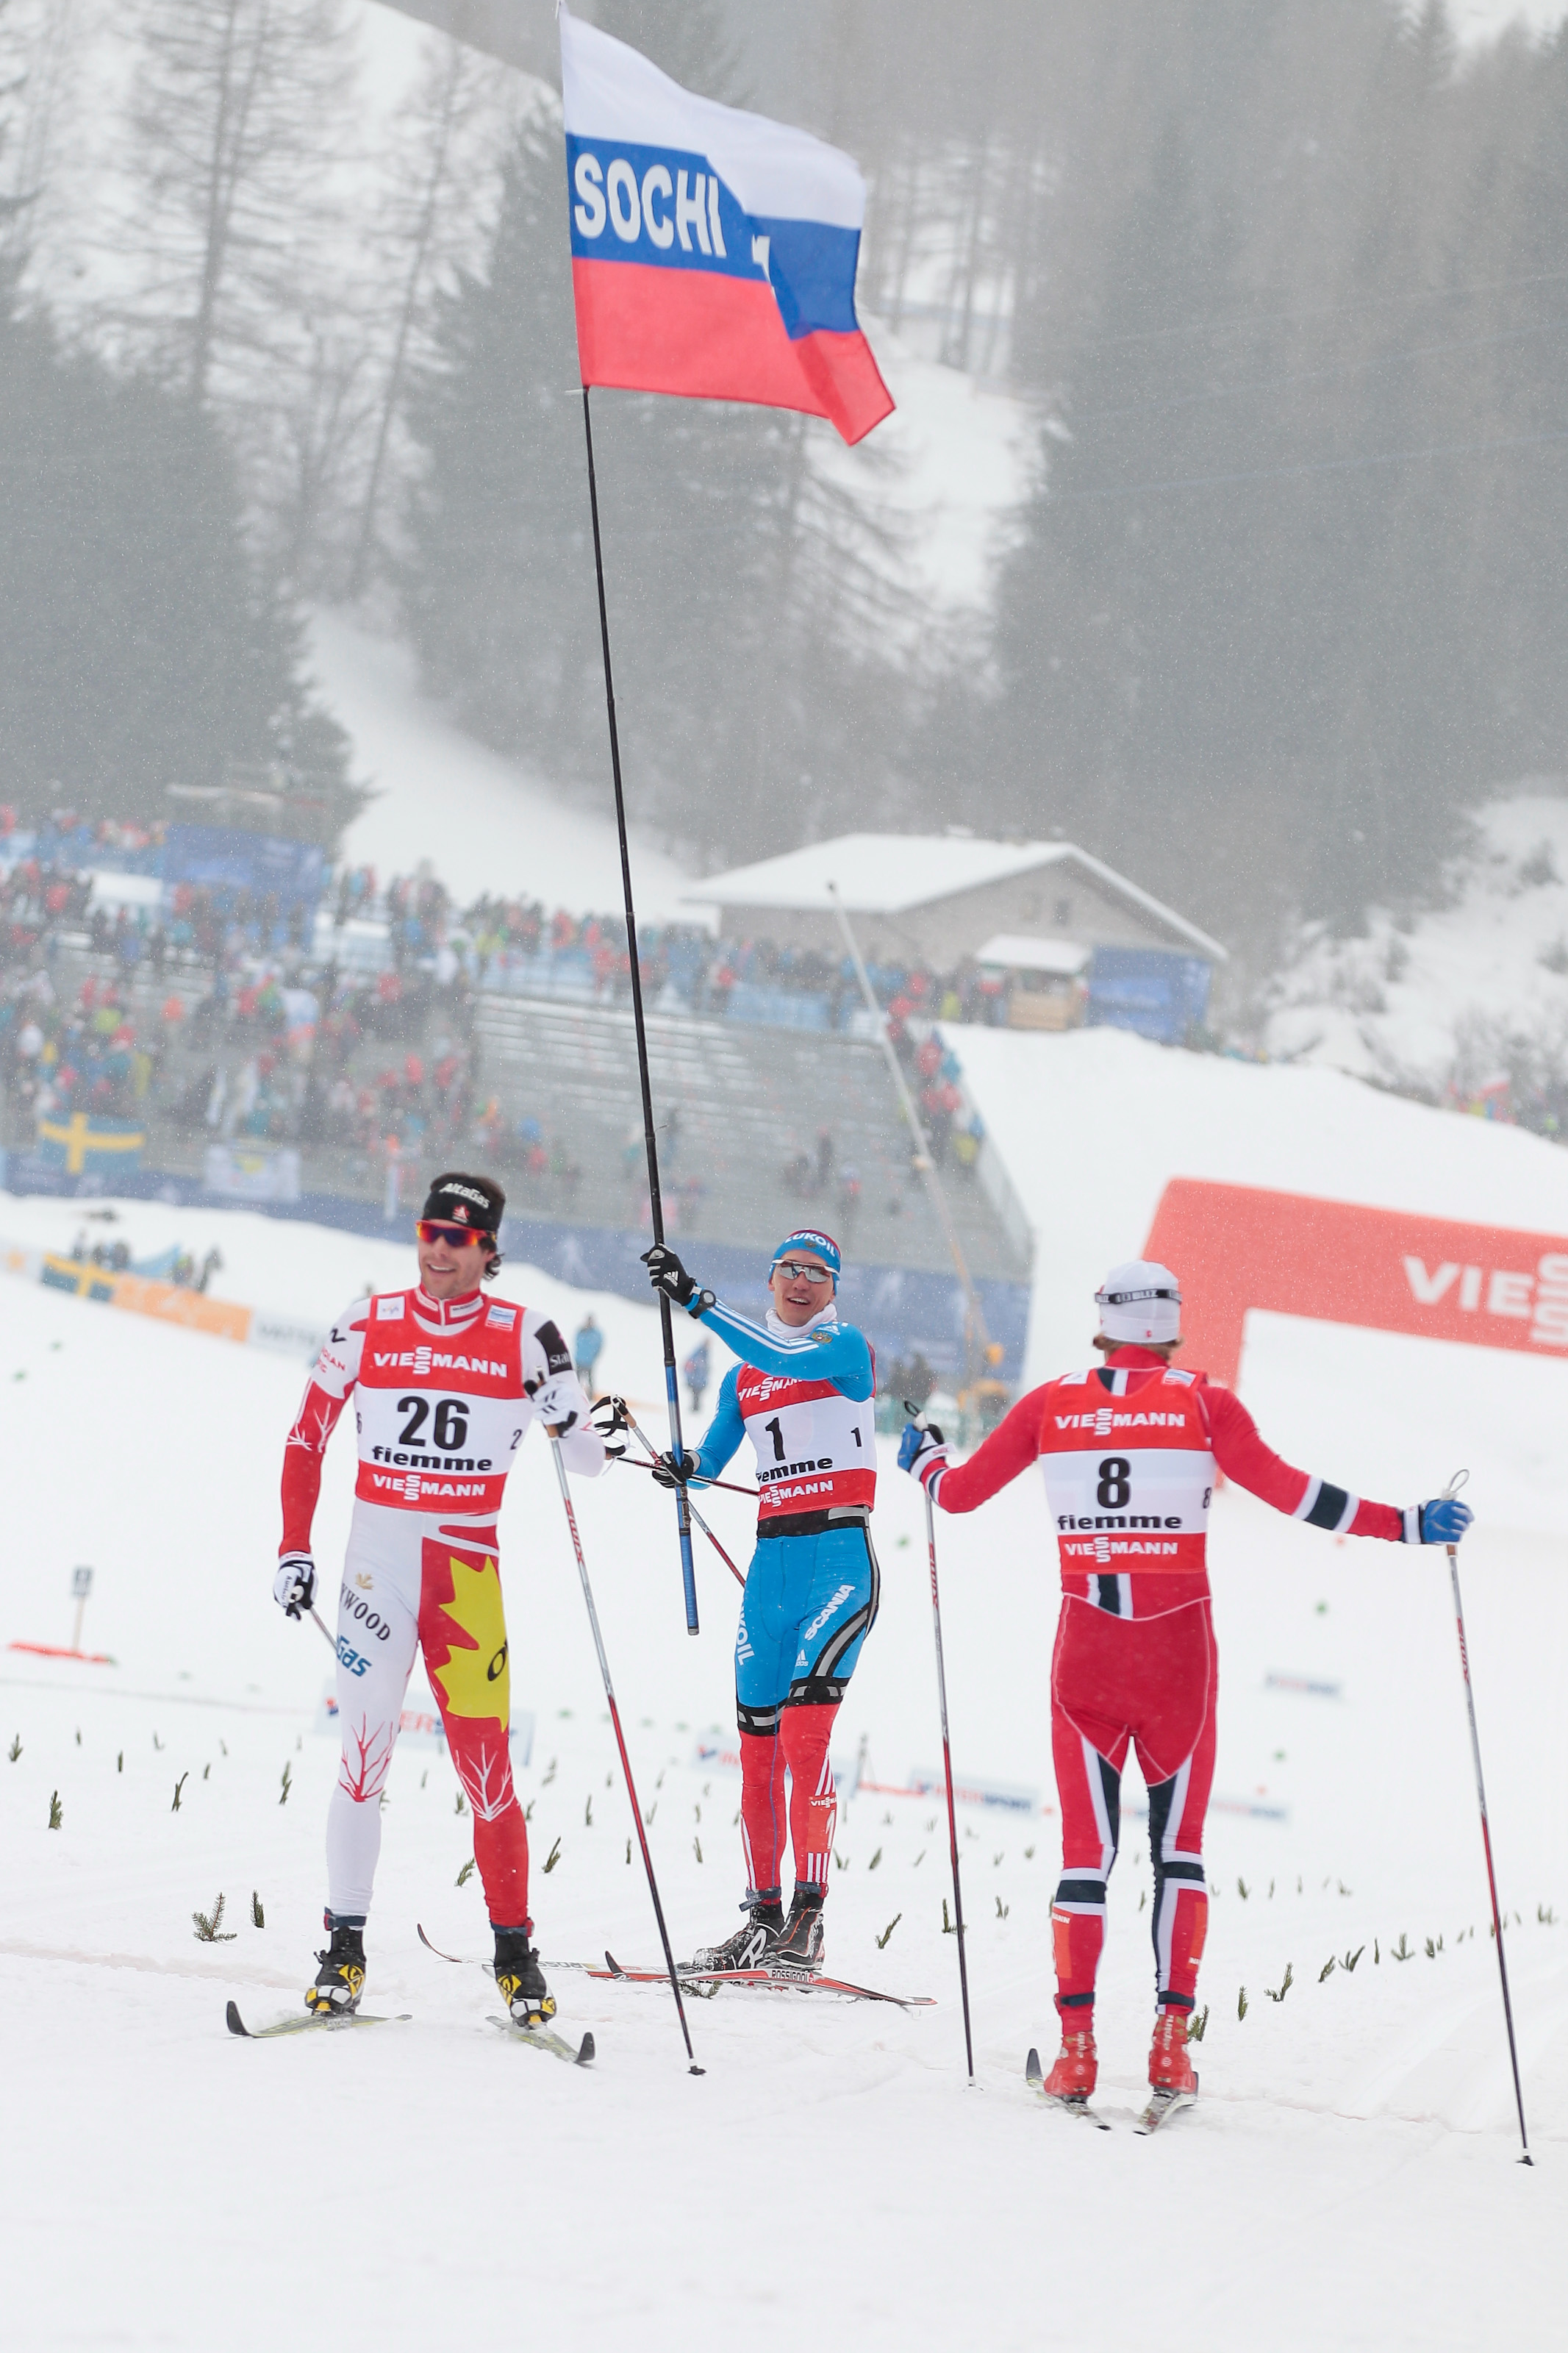 Alex Harvey (l) during a victory lap with Russia's Nikita Kriukov (c), who won the World Championships 1.5 k classic sprint on Thursday, and Norway's Petter Northug, who was second. (Photo: Fiemme2013)